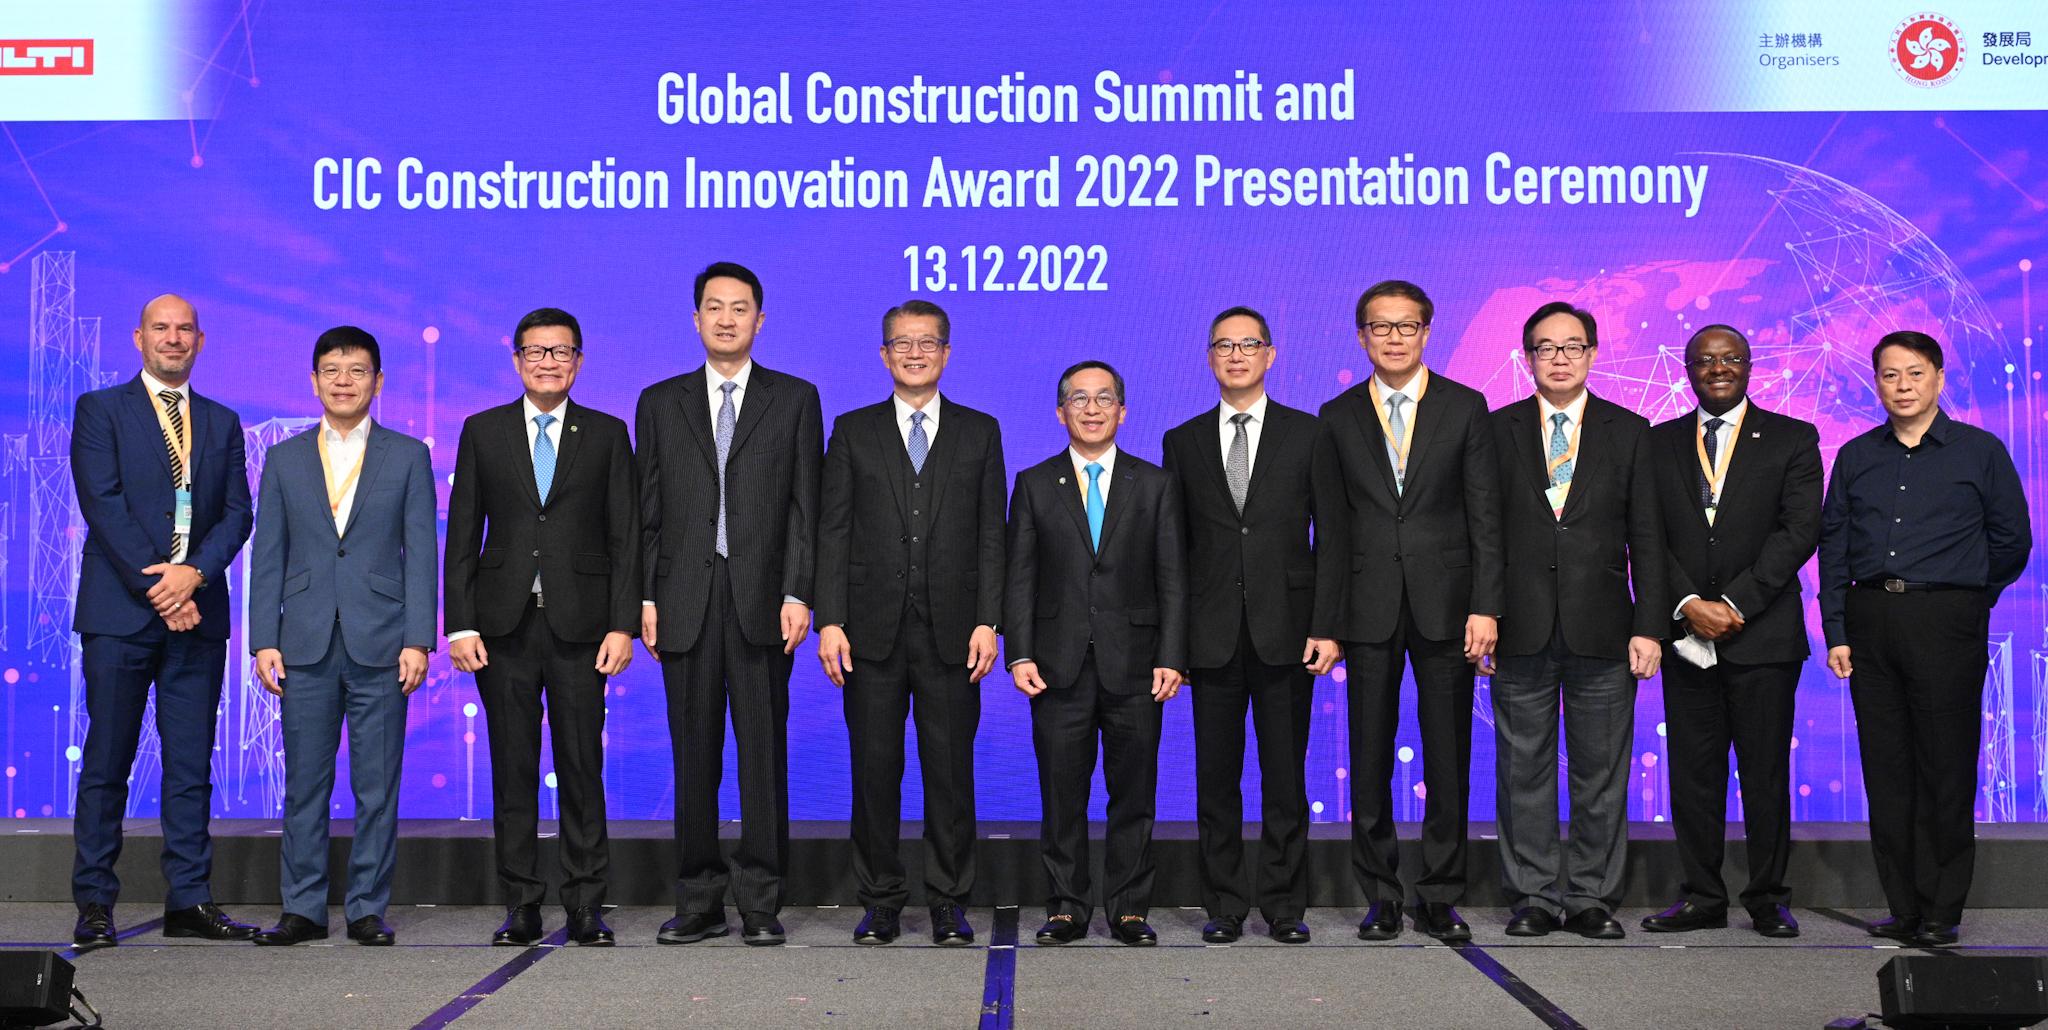 The Financial Secretary, Mr Paul Chan, attended the Global Construction Summit and CIC Construction Innovation Award 2022 Presentation Ceremony today (December 13). Photo shows (from fourth left) the Director-General of Department of Construction Market Supervision of the Ministry of Housing and Urban-Rural Development of the People's Republic of China, Mr Zeng Xianxin; Mr Chan; the Chairman of the Construction Industry Council, Mr Thomas Ho; the Permanent Secretary for Development (Works), Mr Ricky Lau; and other guests at the event. 

